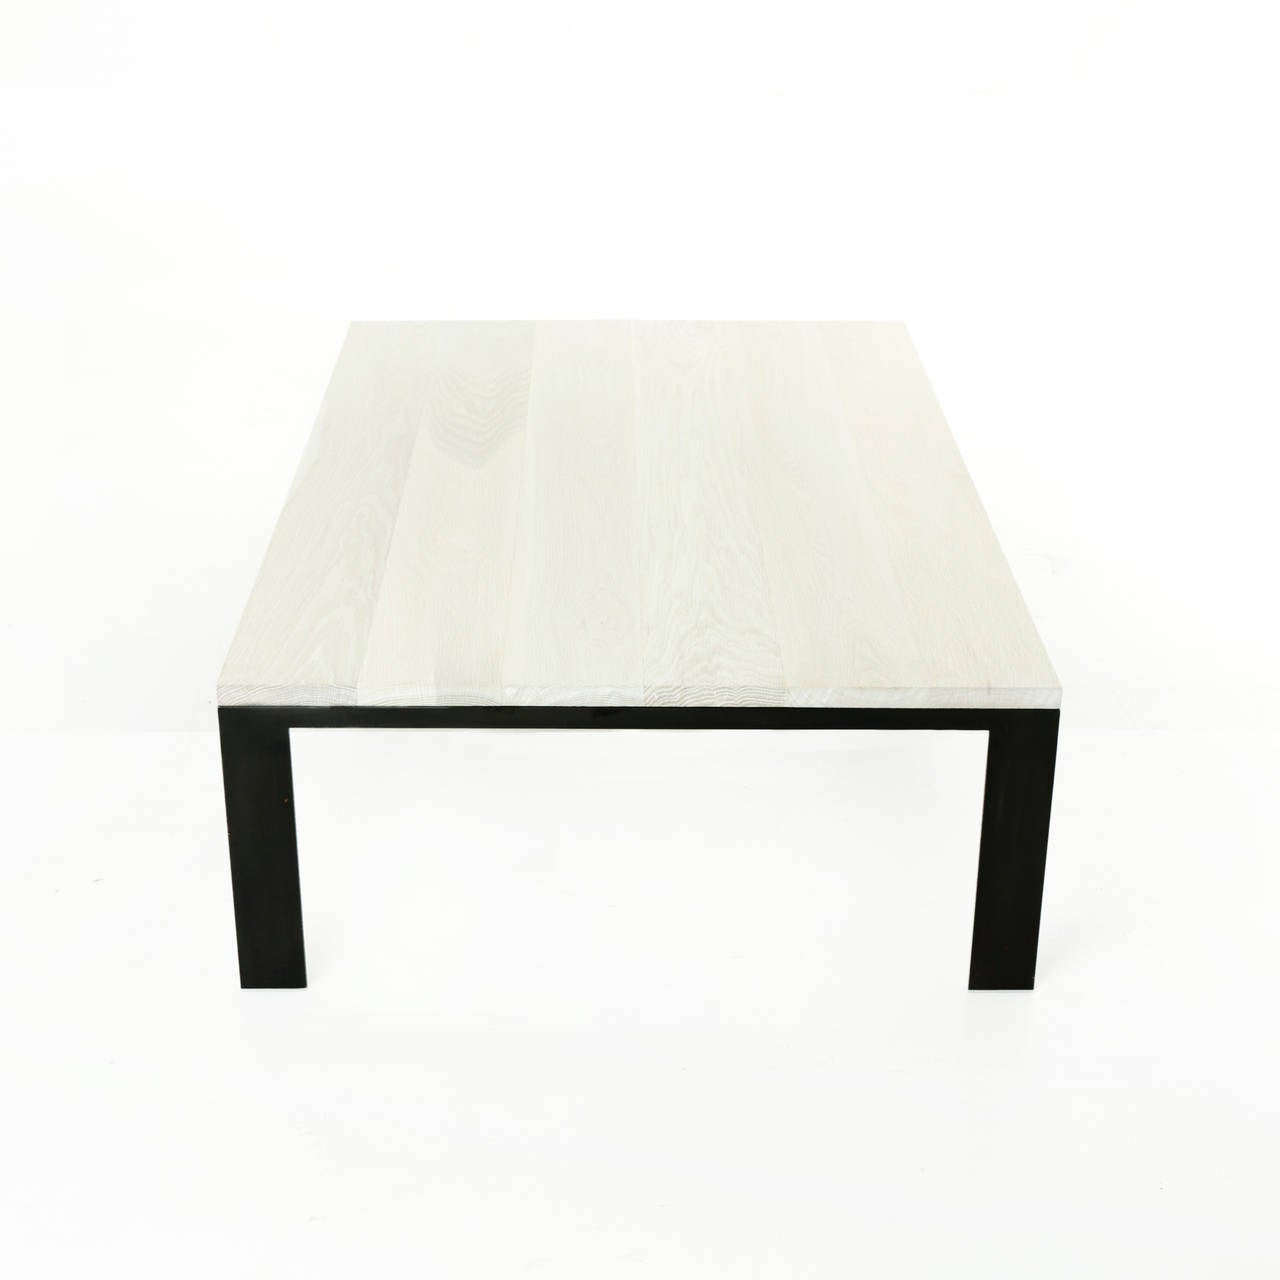 A simply elegant coffee table with a solid oak top with bleached and blanched oil and black powder coated steel legs.

Many pieces are stored in our warehouse, so please click on contact dealer under our logo below to find out if the pieces you